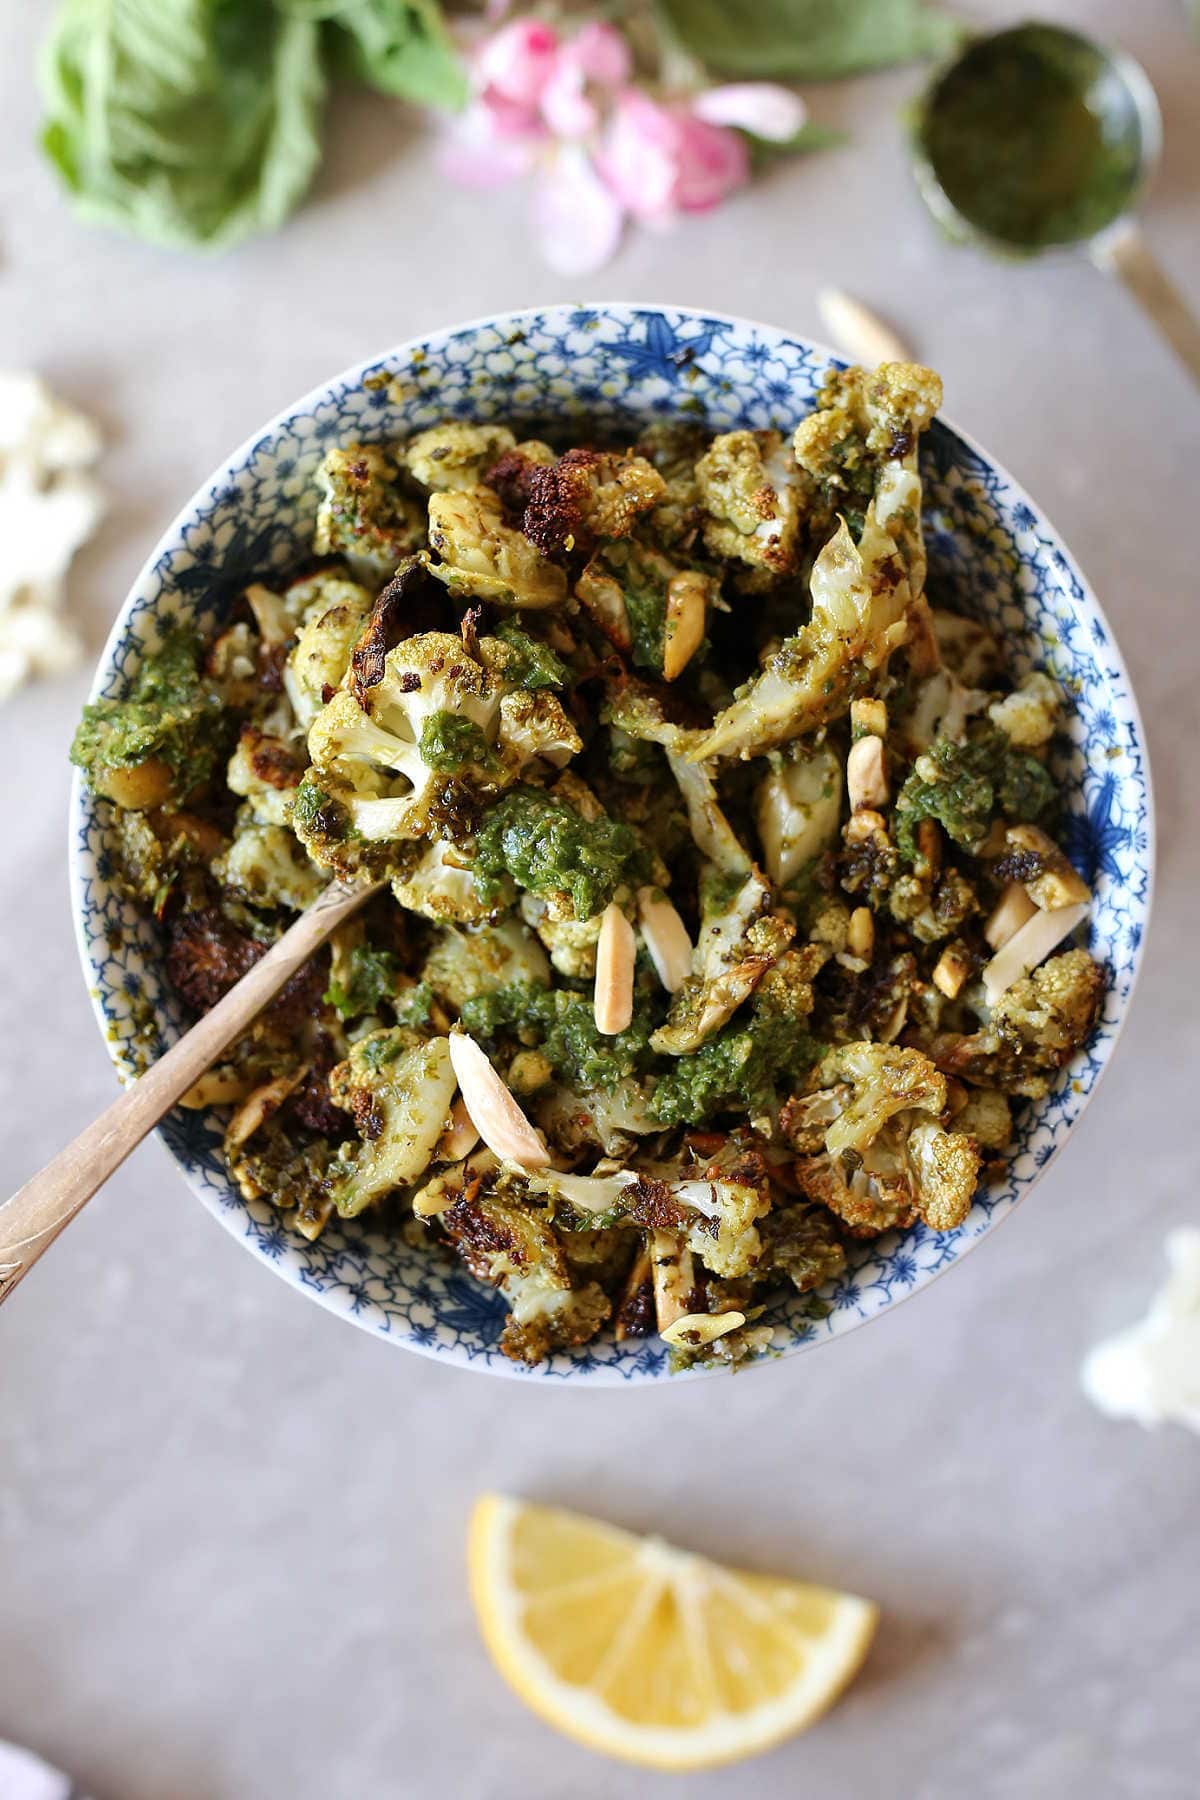 Roasted cauliflower with pesto and almond slivers in a bowl